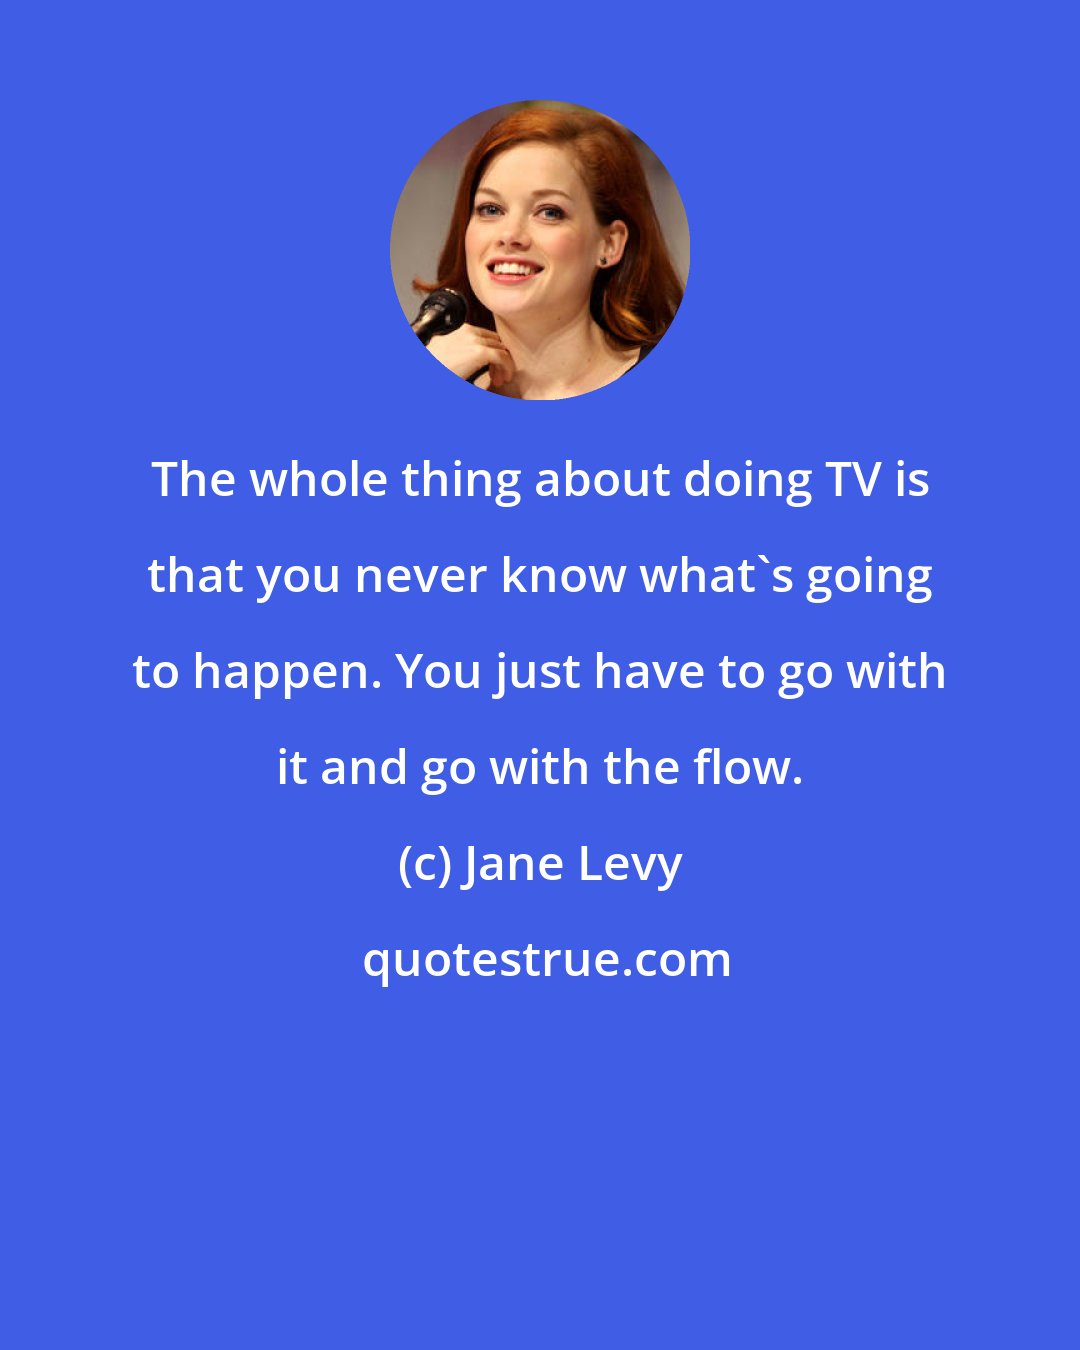 Jane Levy: The whole thing about doing TV is that you never know what's going to happen. You just have to go with it and go with the flow.